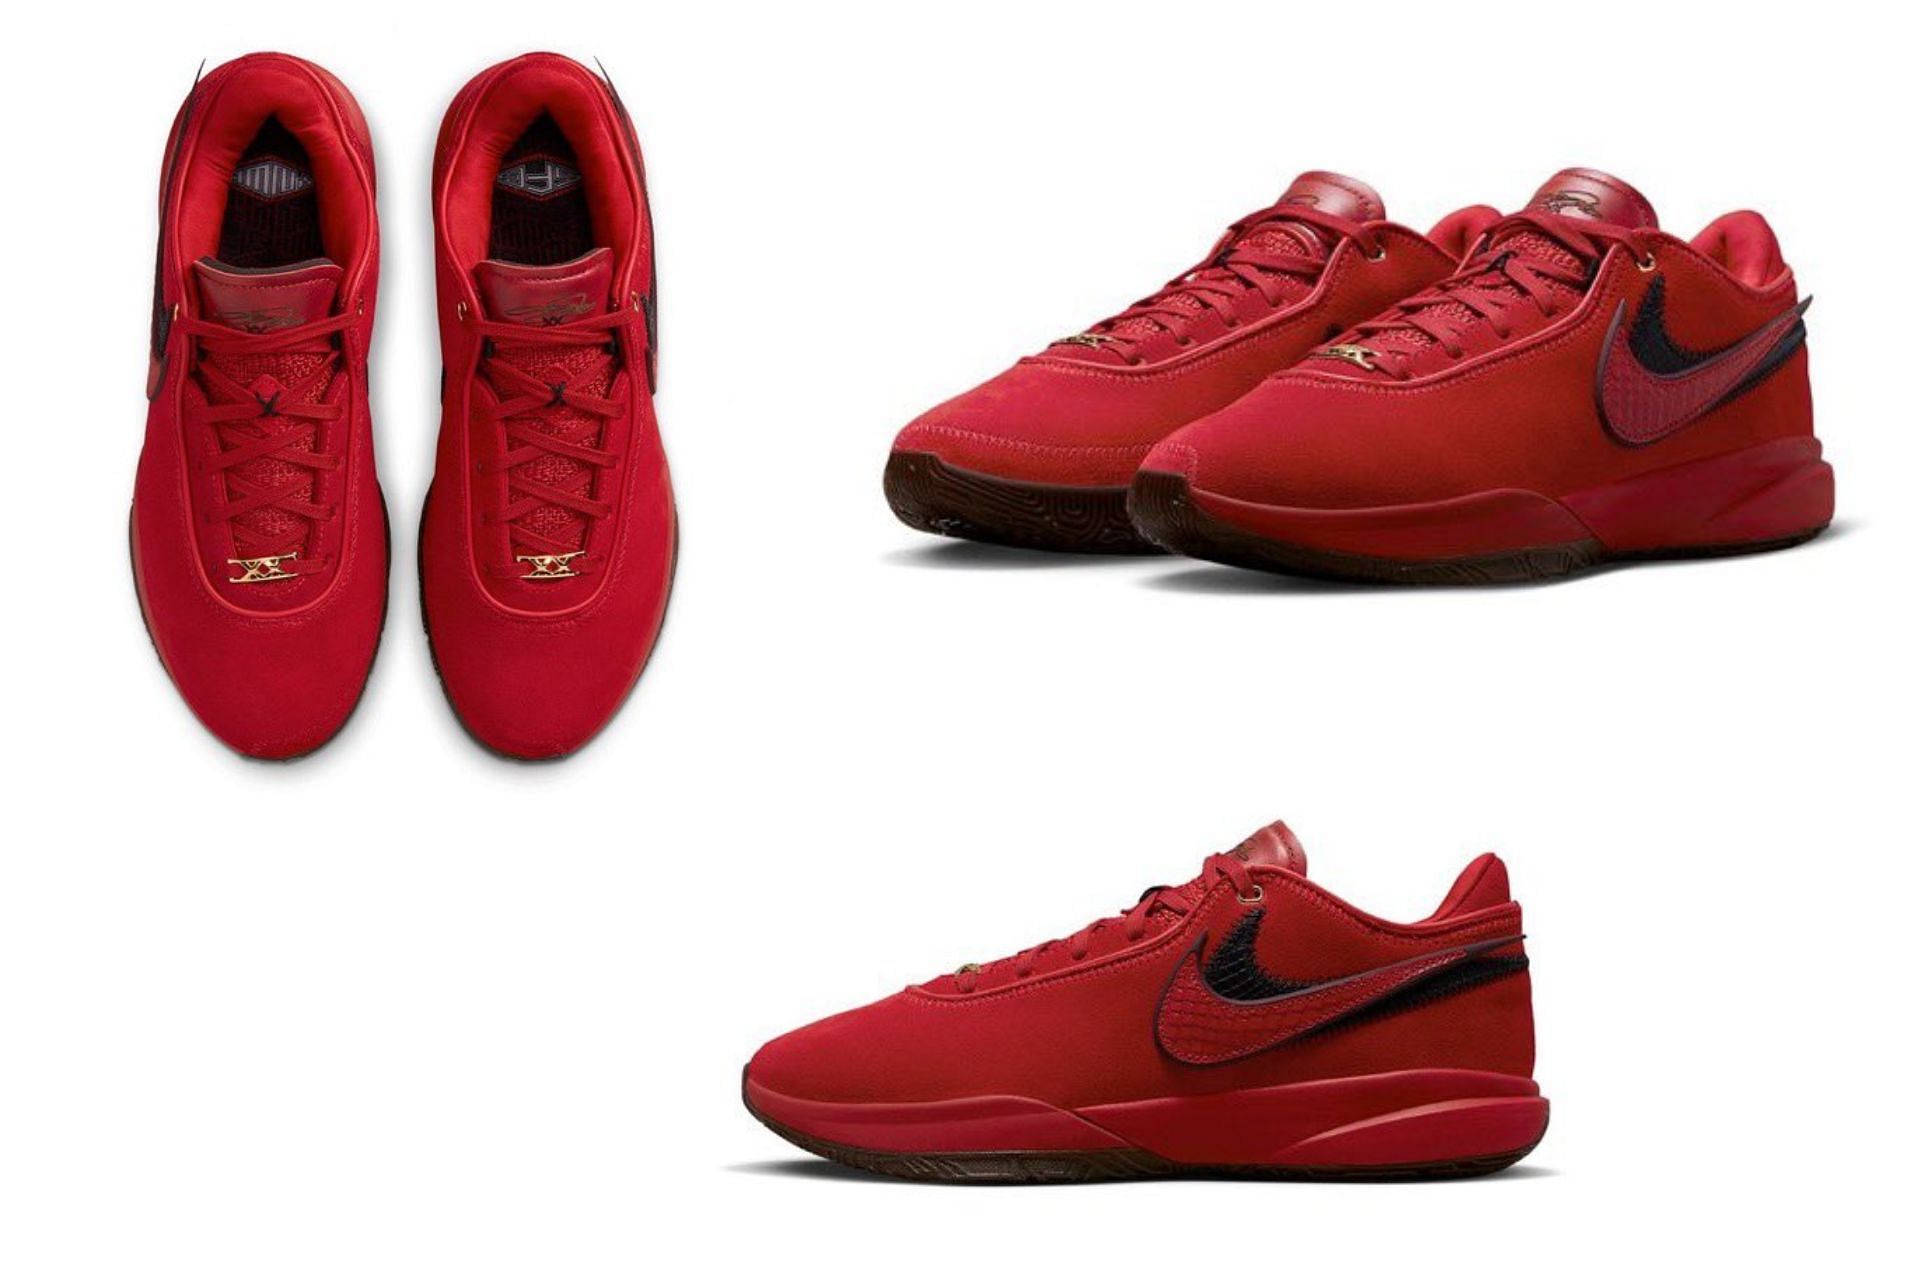 A detailed look at the upcoming Nike LeBron 20 Liverpool F.C. colorway (Image via Sportskeeda)